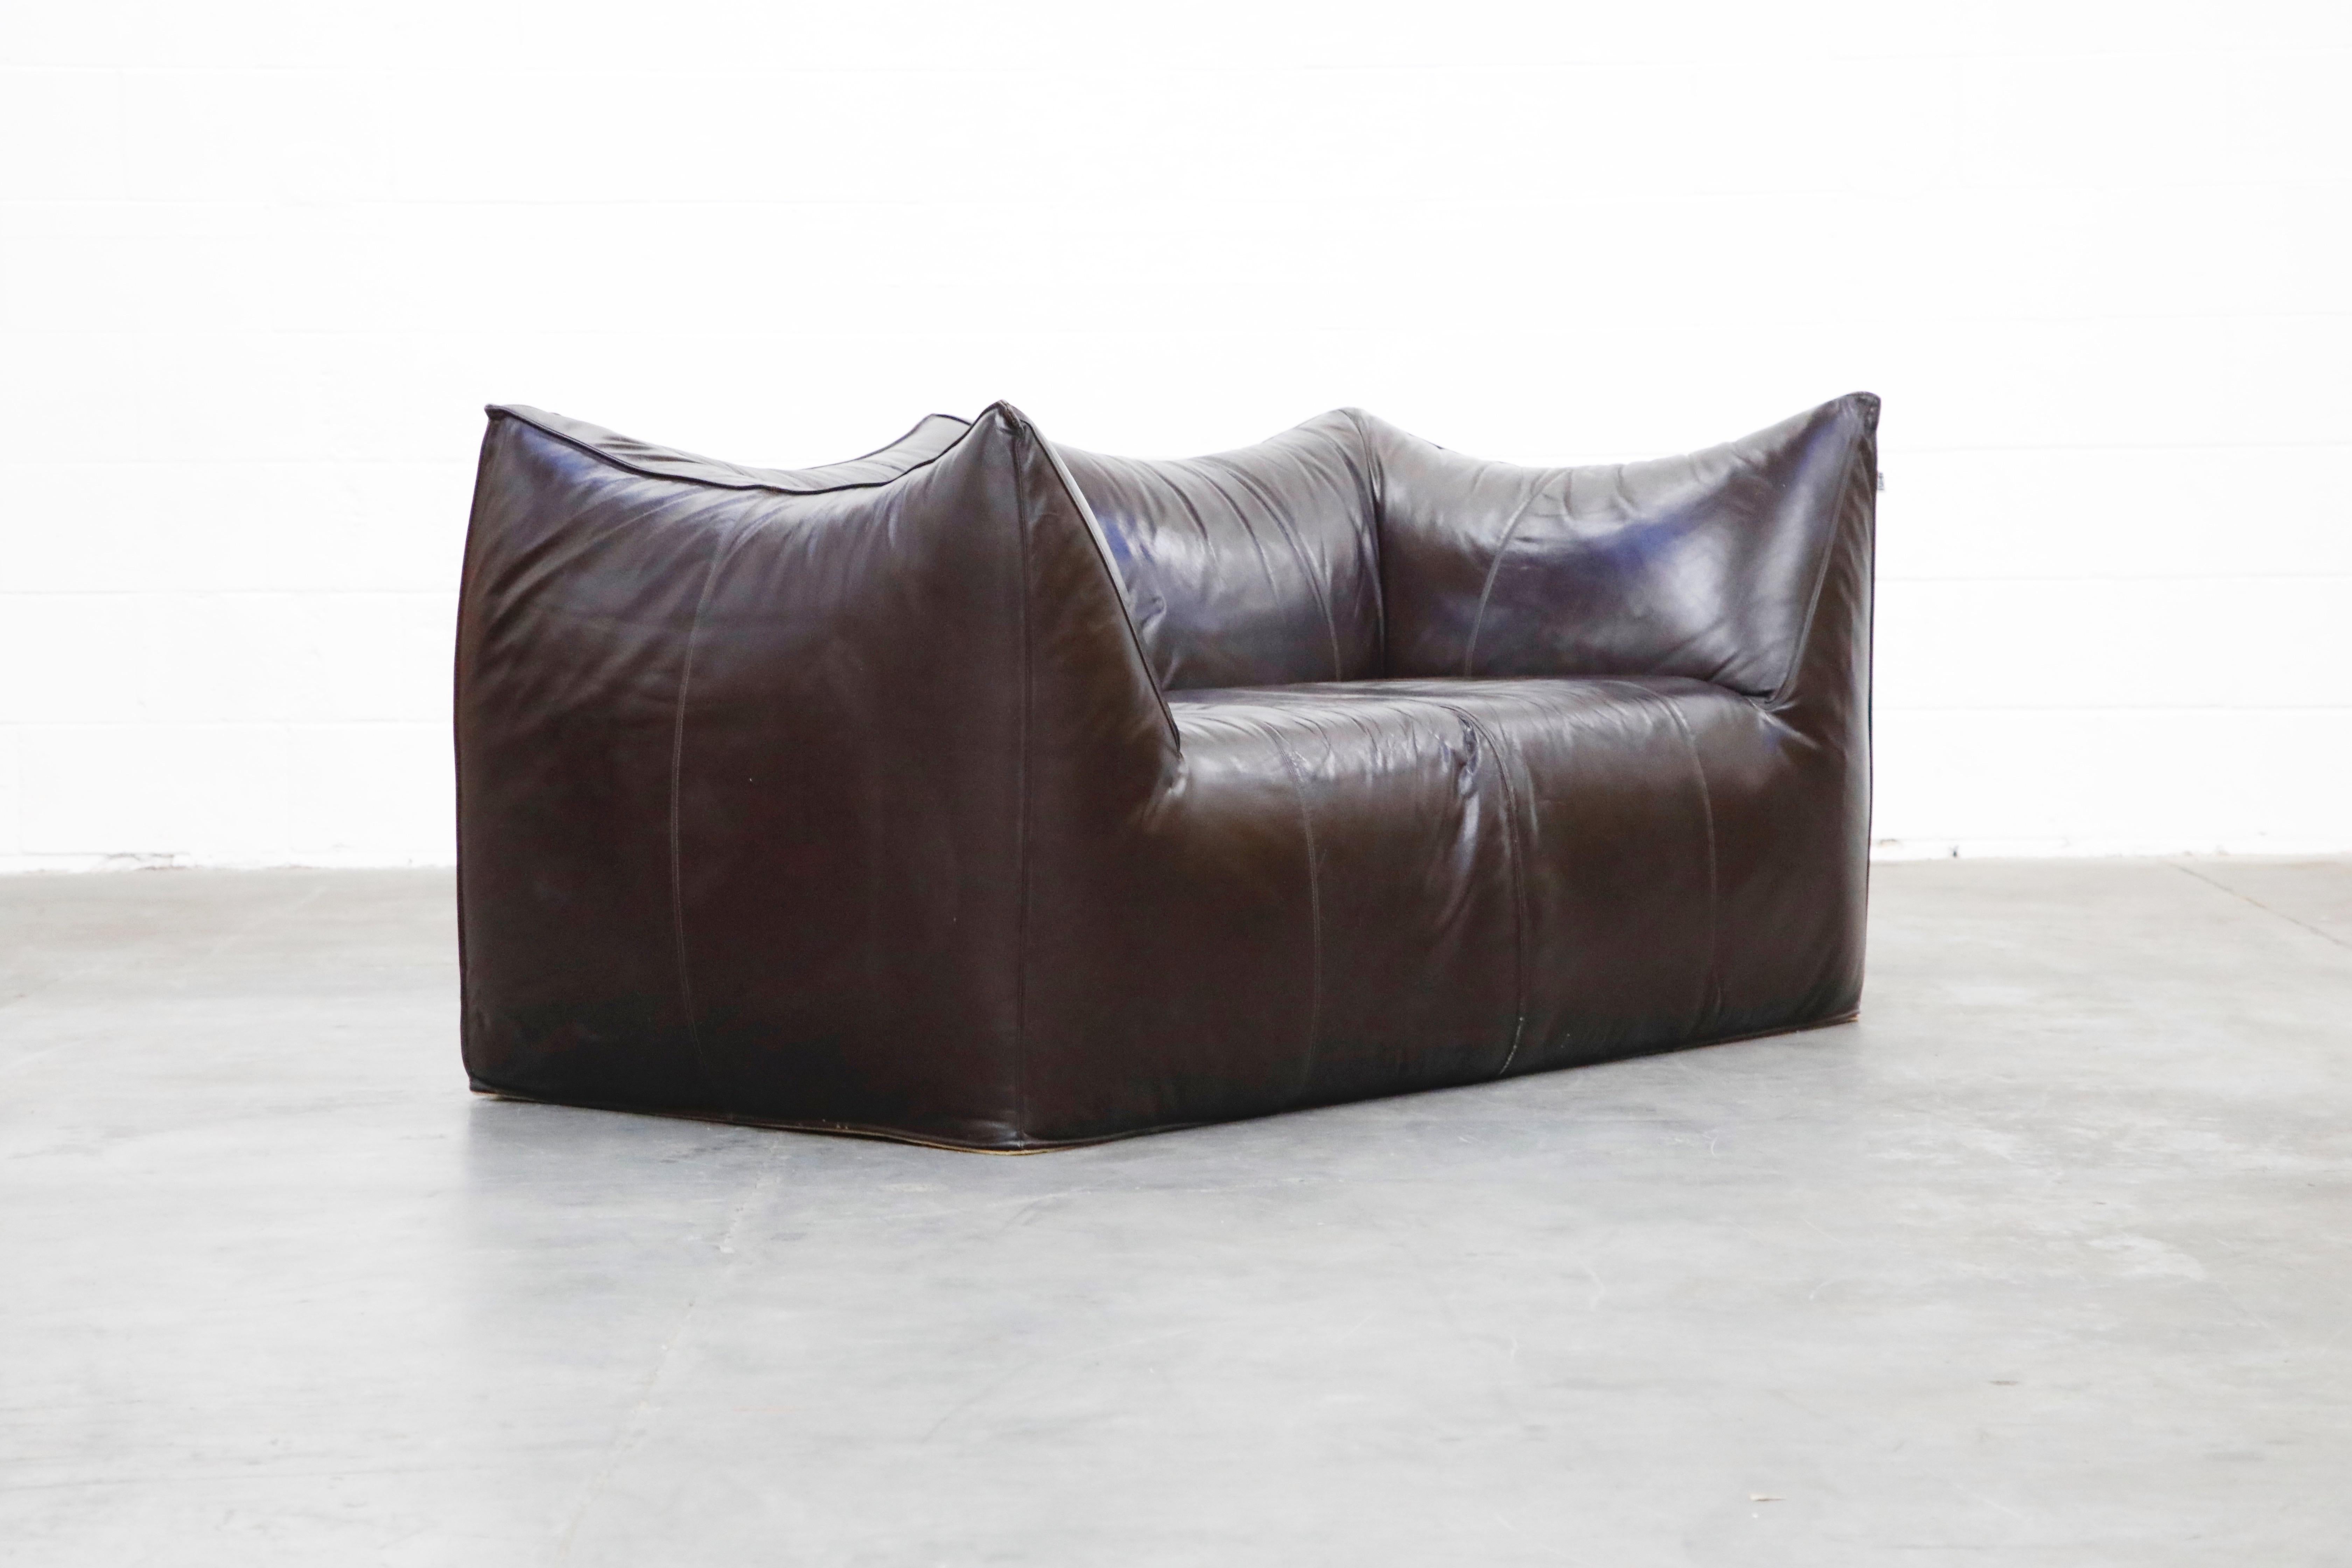 Late 20th Century 'Le Bambole' Thick Hide Leather Loveseat by Mario Bellini for B&B Italia, Signed